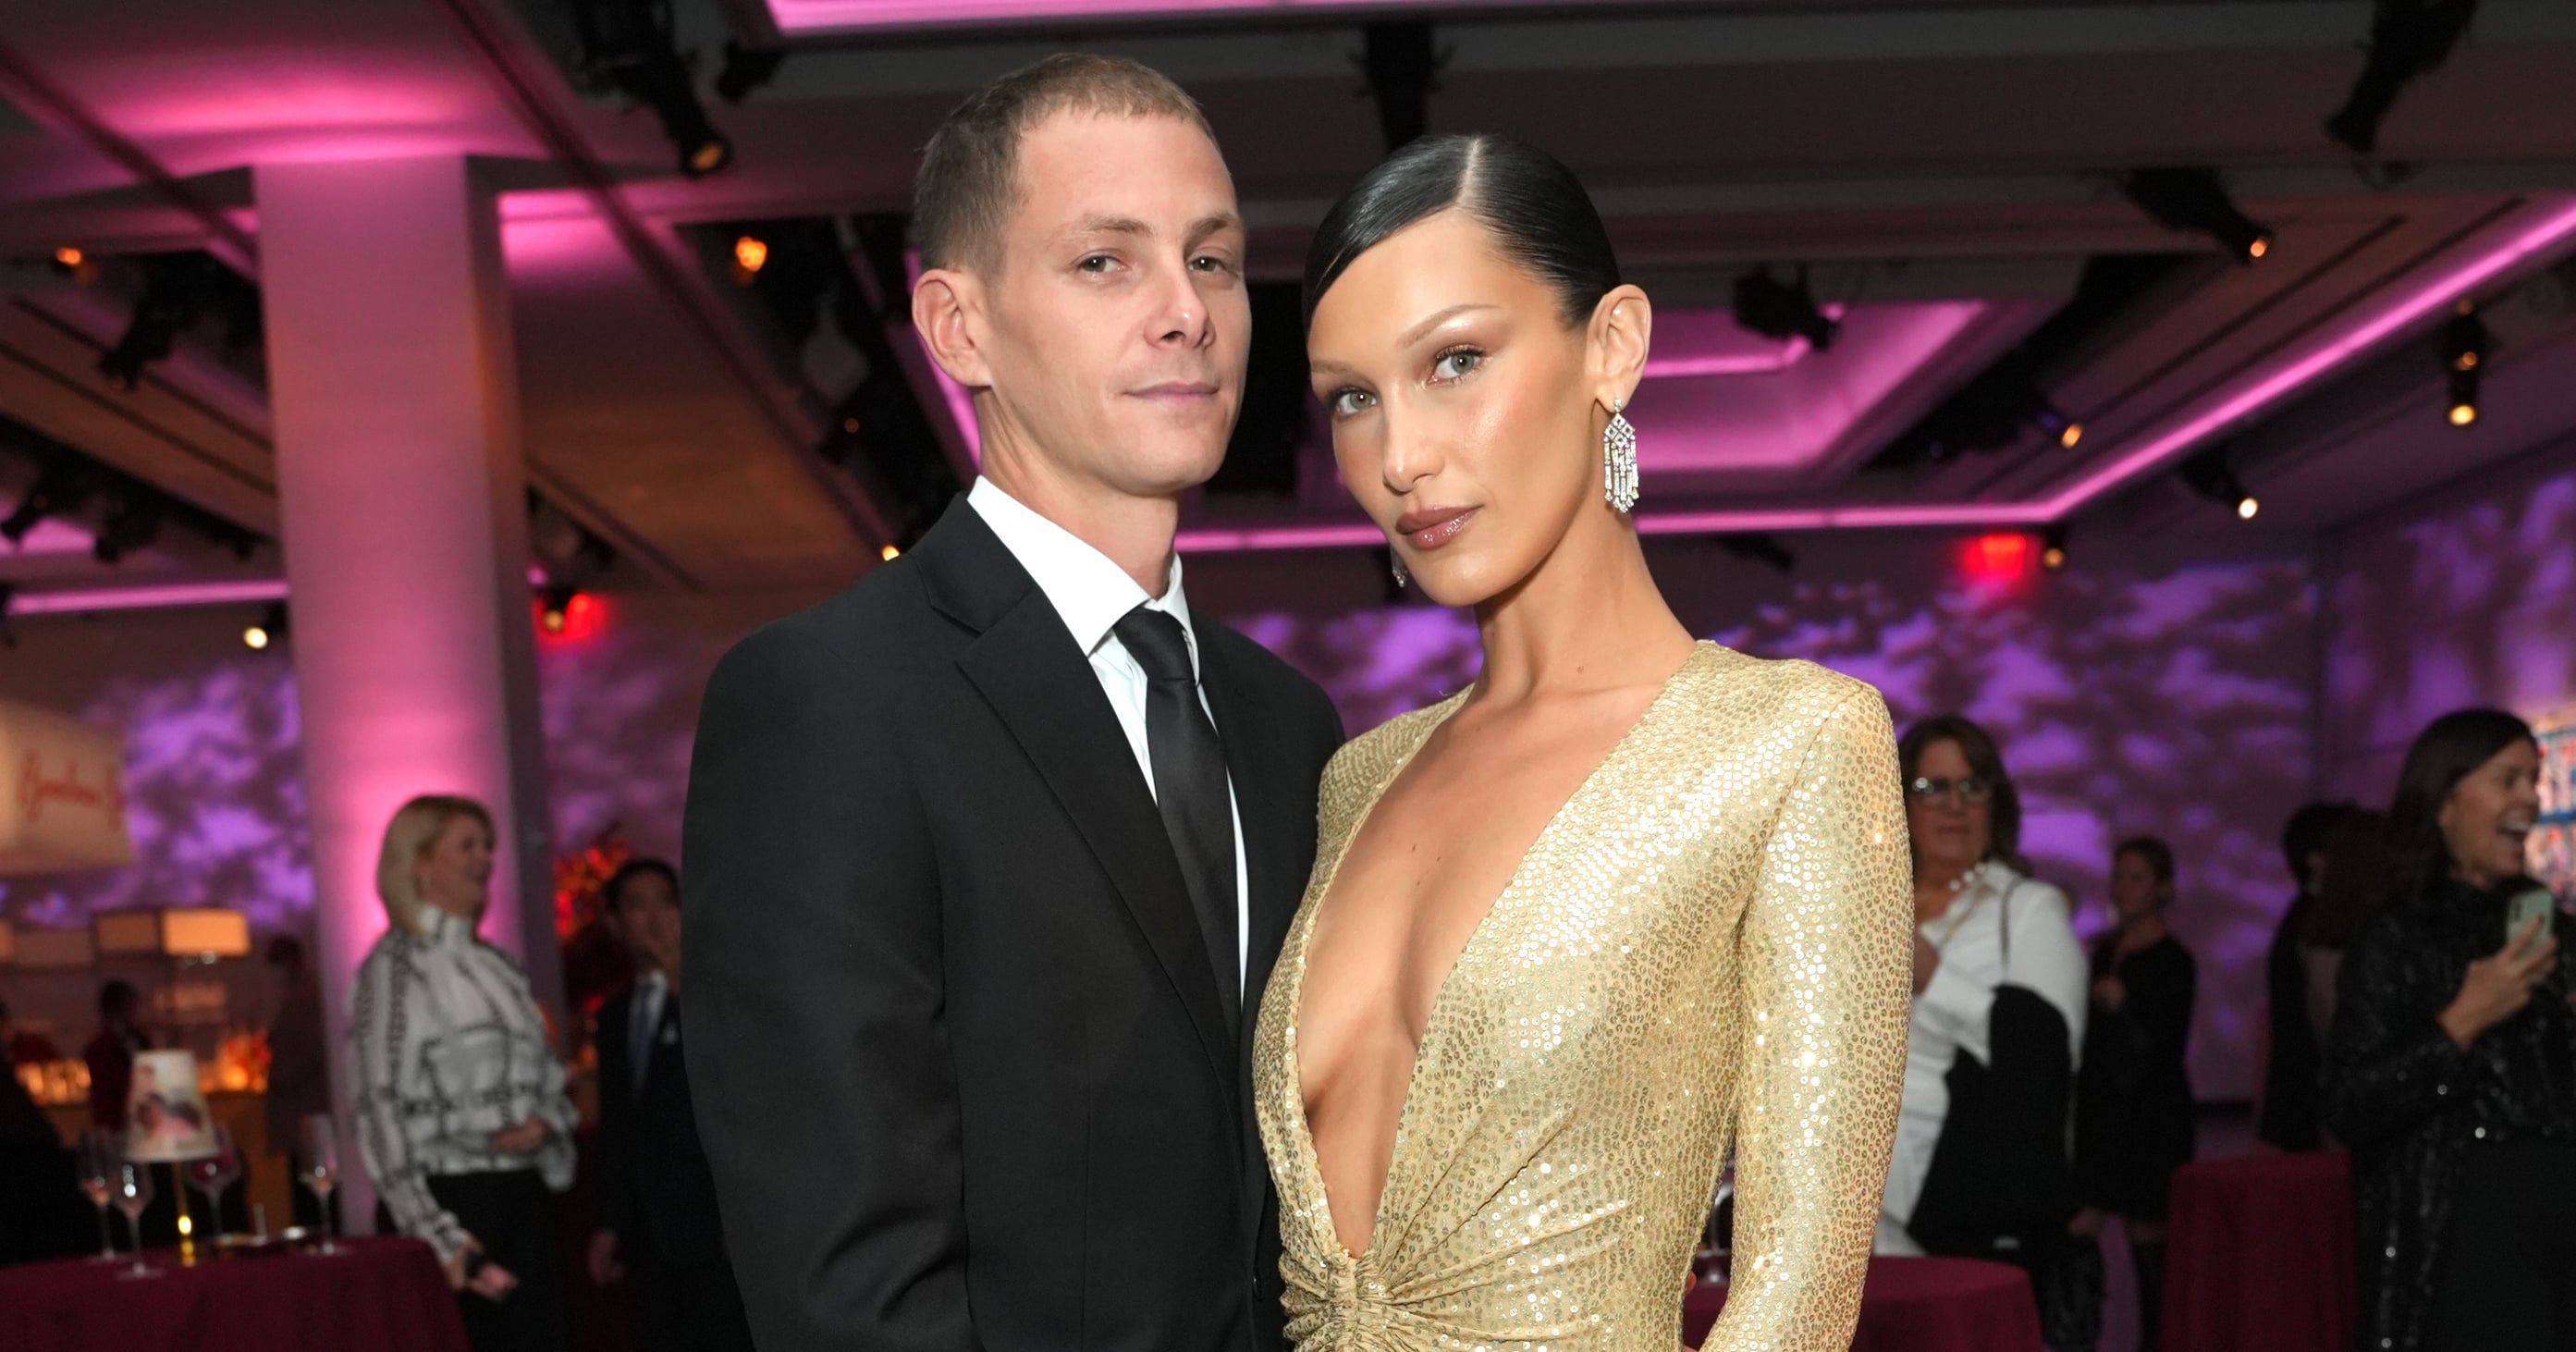 Bella Hadid and Marc Kalman Reportedly “Decided to End Things” After 2 Years of Dating